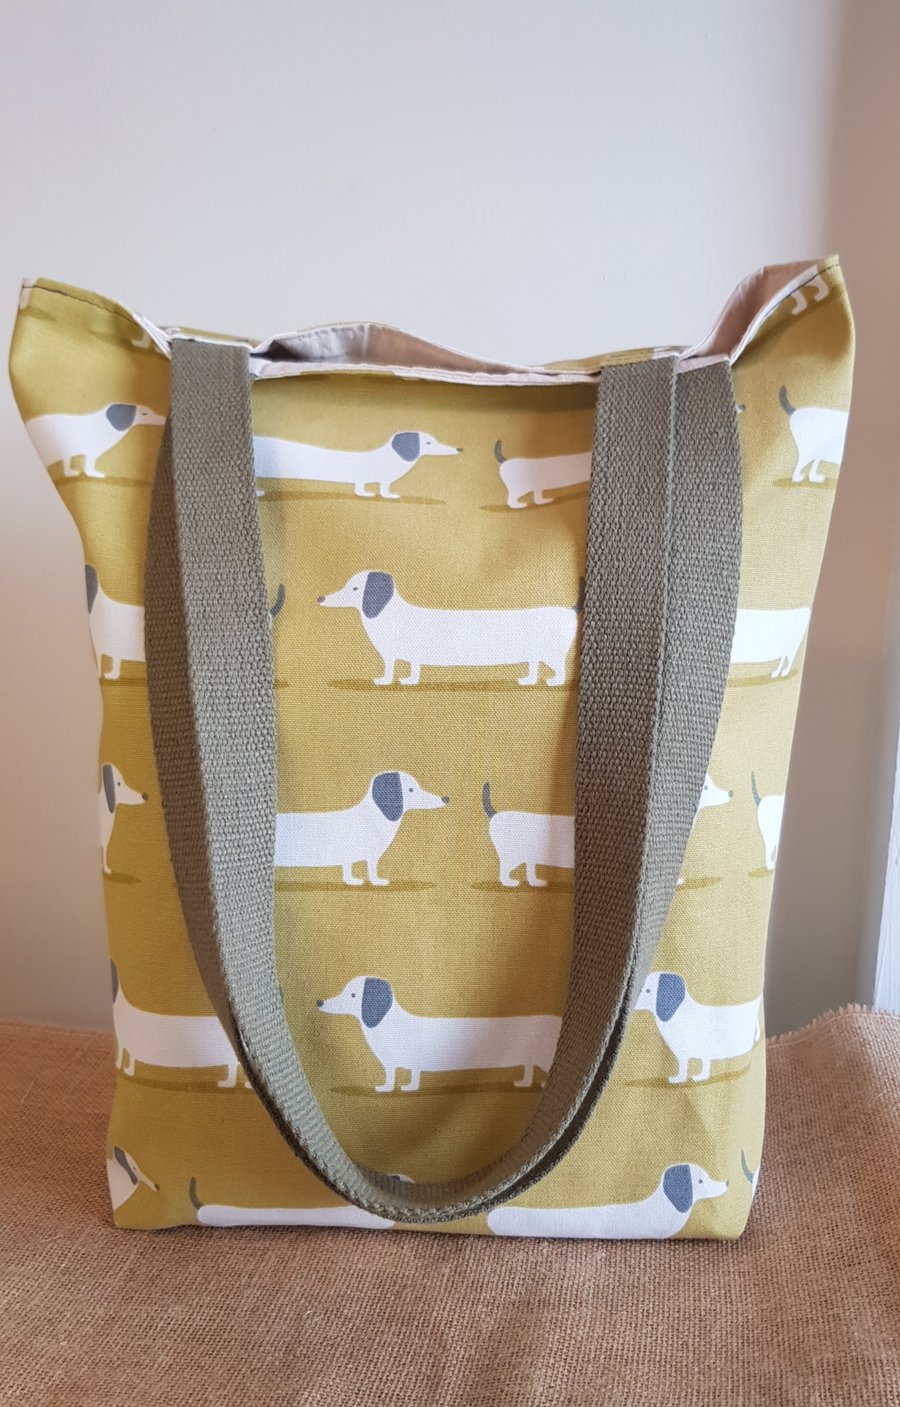 Doggy tote bag with long handles: dachshund design fabric 